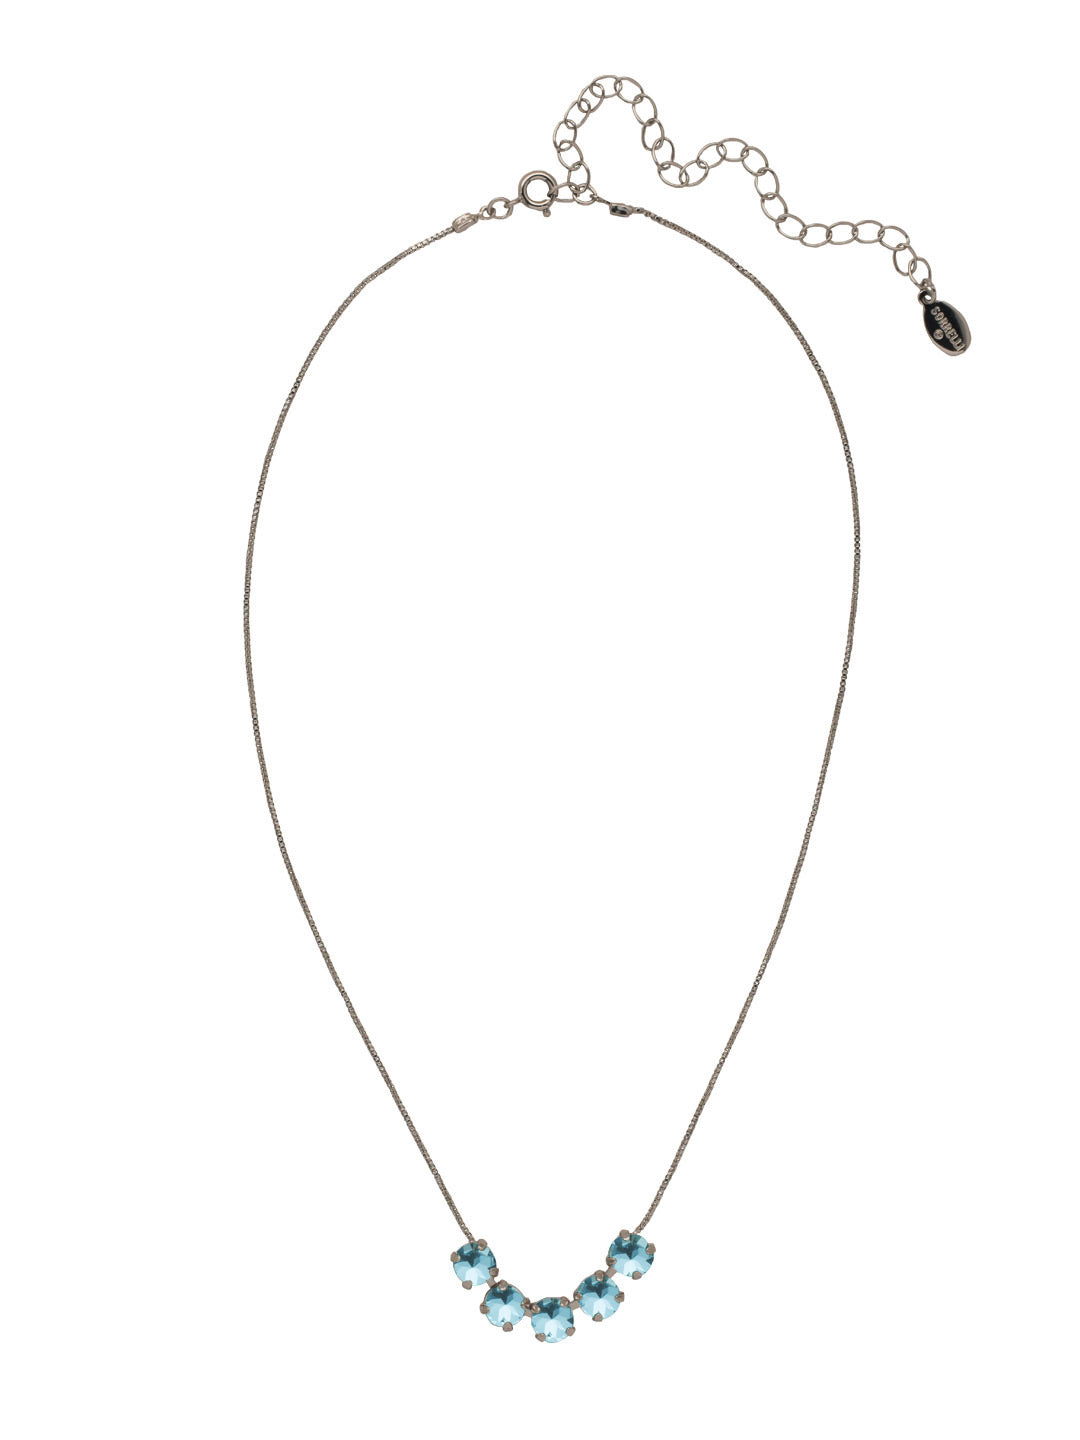 Shaughna Tennis Necklace - NFC84ASAQU - <p>The Shaughna Tennis Necklace features five crystals on a delicate adjustable chain. From Sorrelli's Aquamarine collection in our Antique Silver-tone finish.</p>